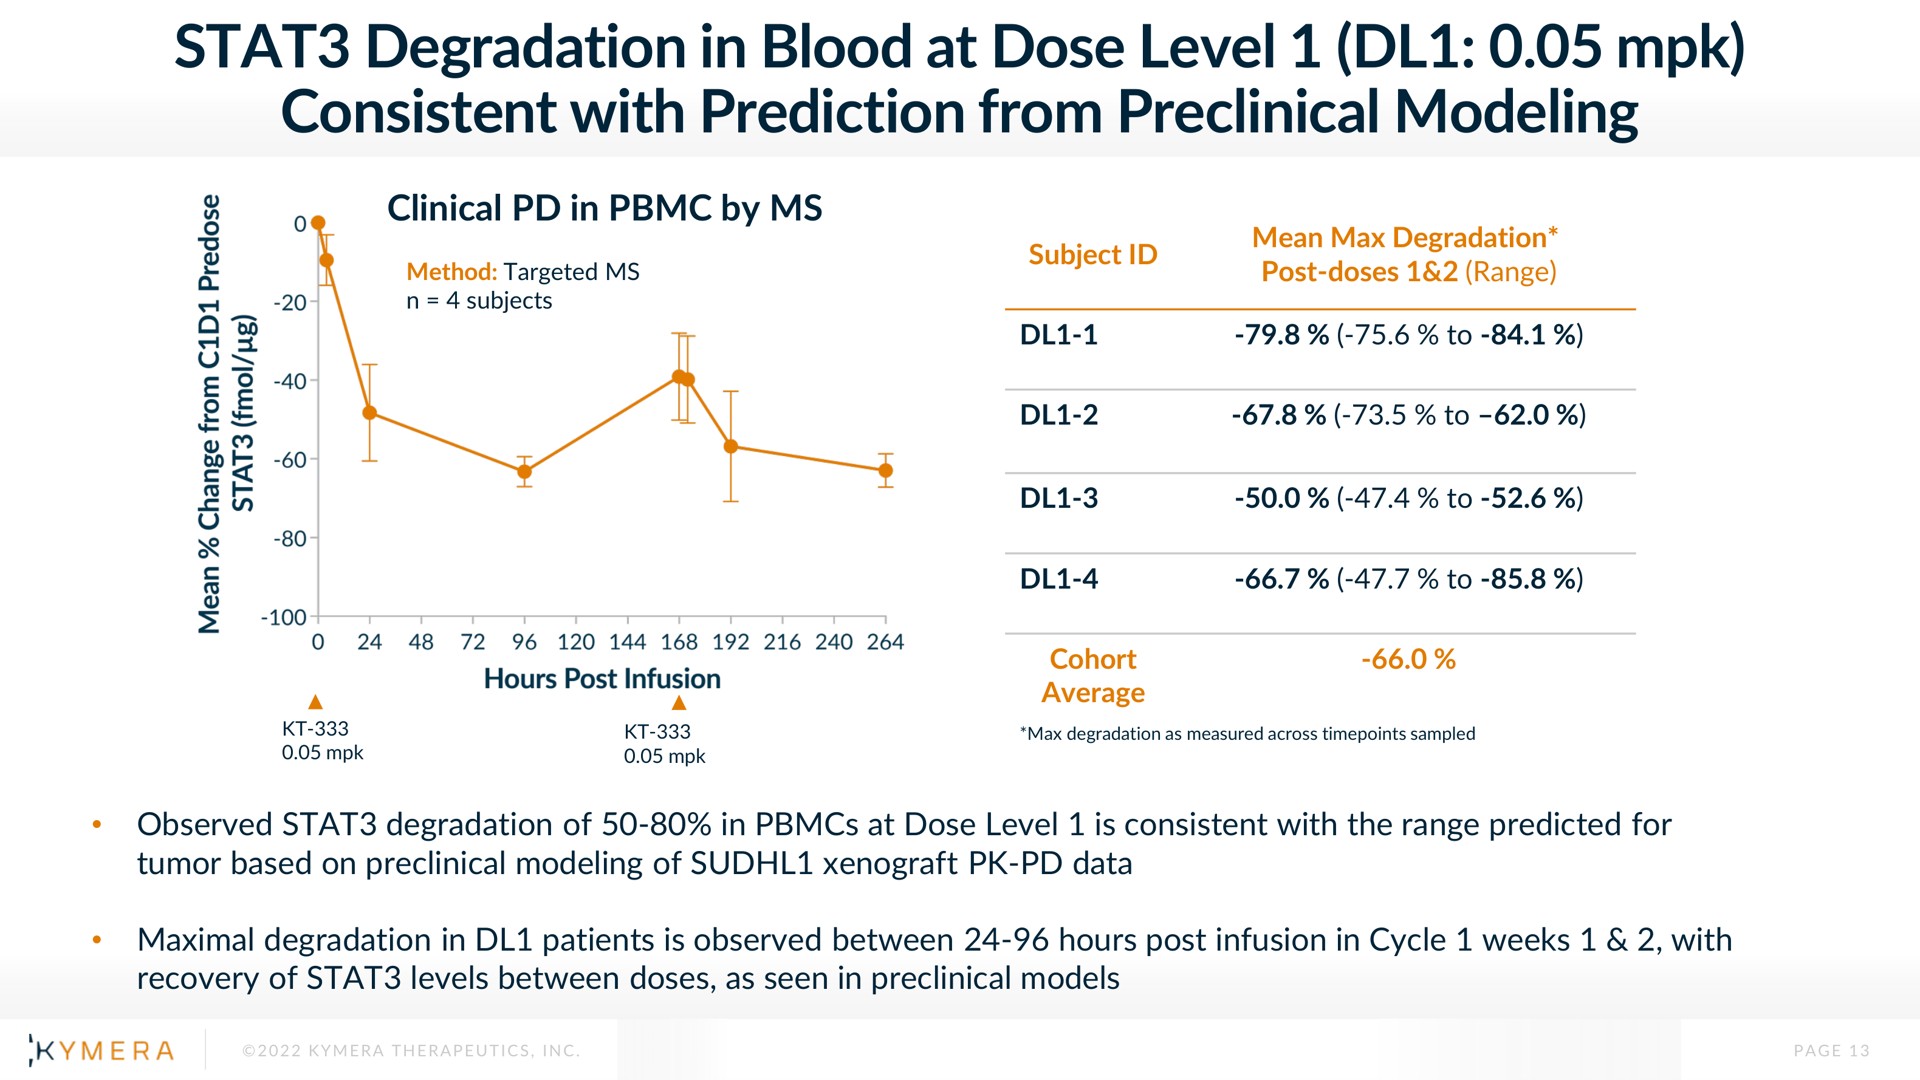 degradation in blood at dose level consistent with prediction from preclinical modeling | Kymera